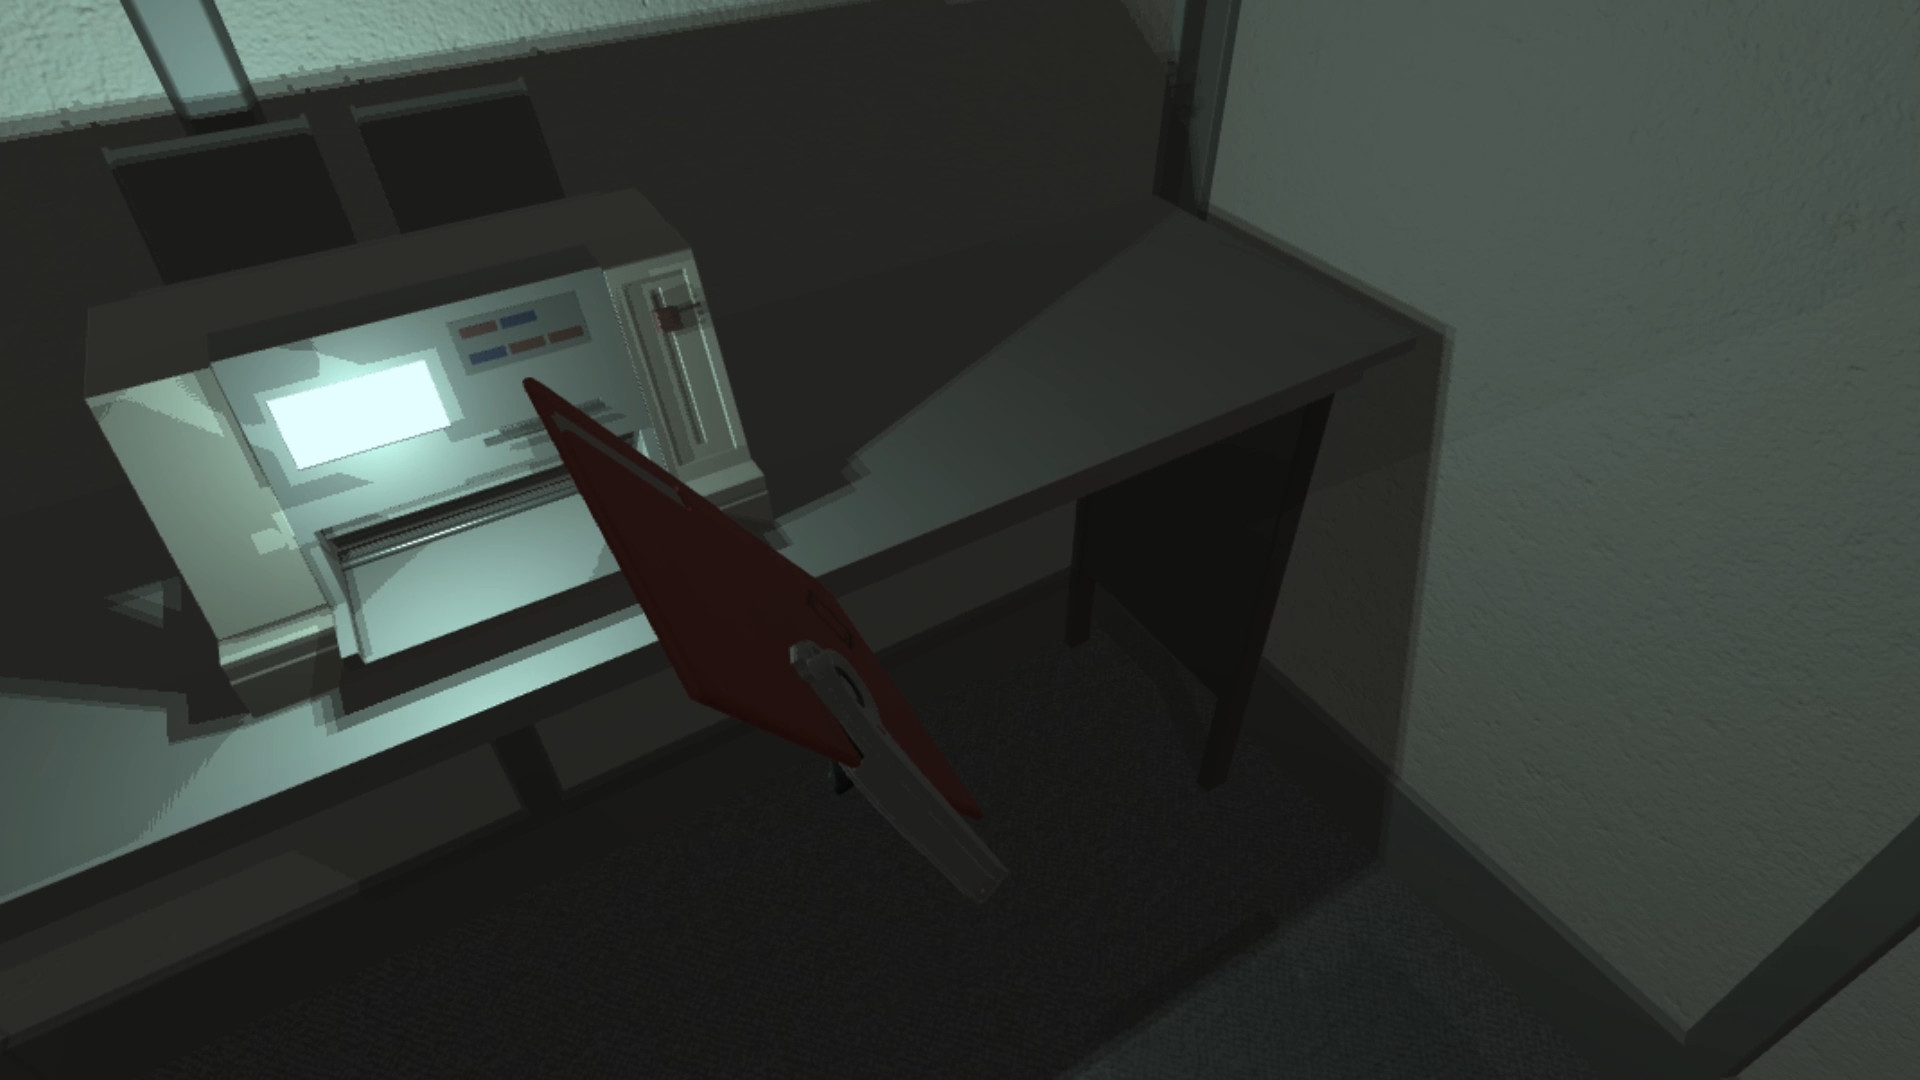 The Cubicle. on Steam